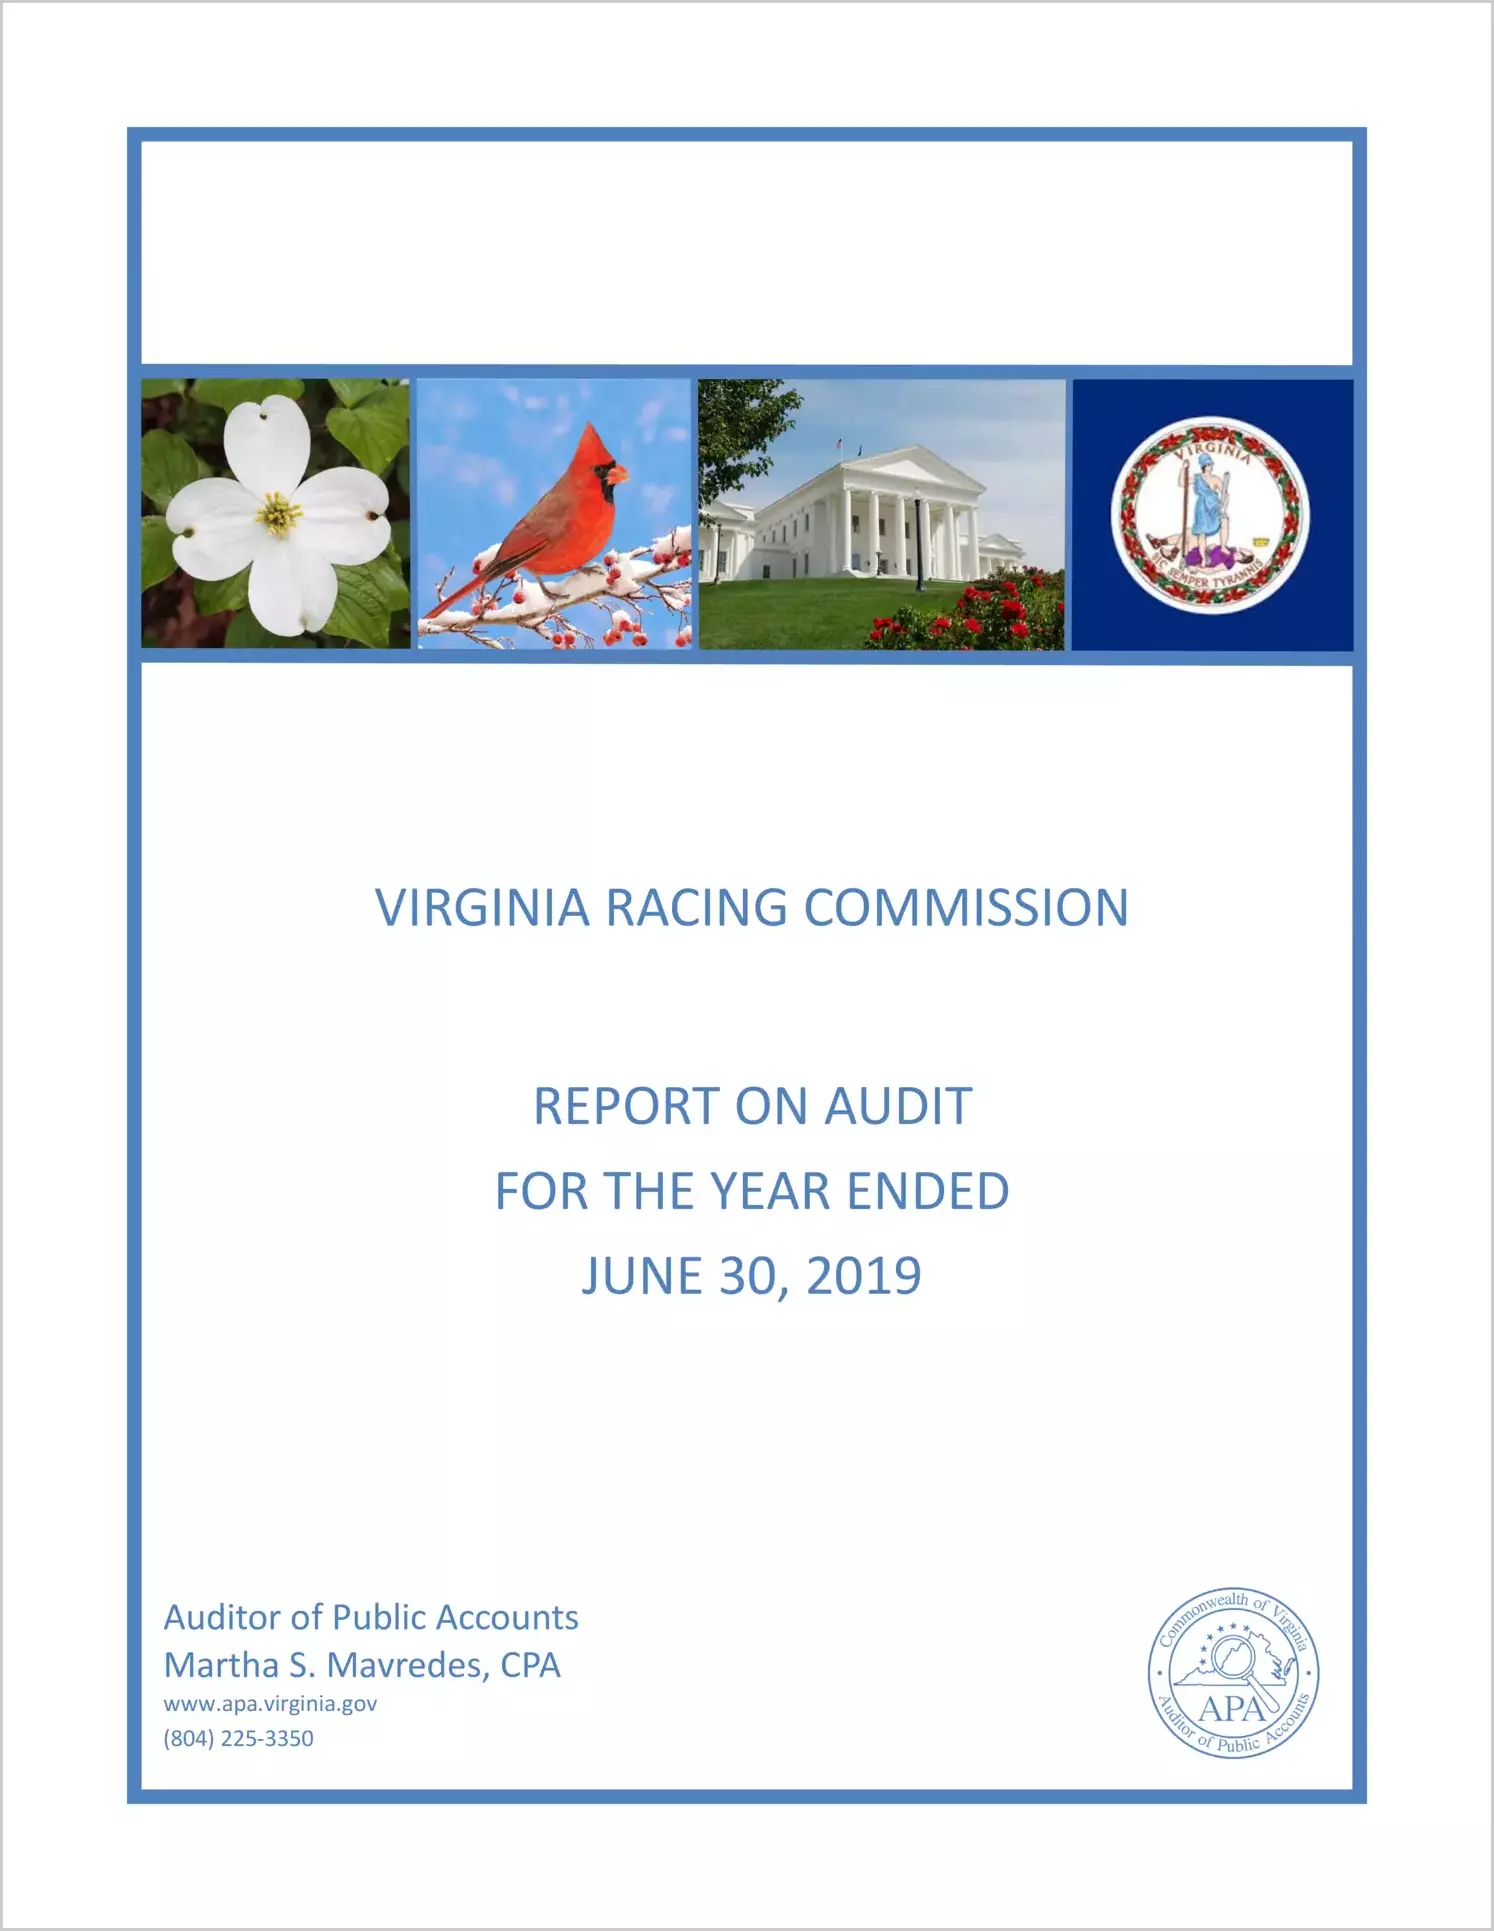 Virginia Racing Commission for the year ended June 30, 2019